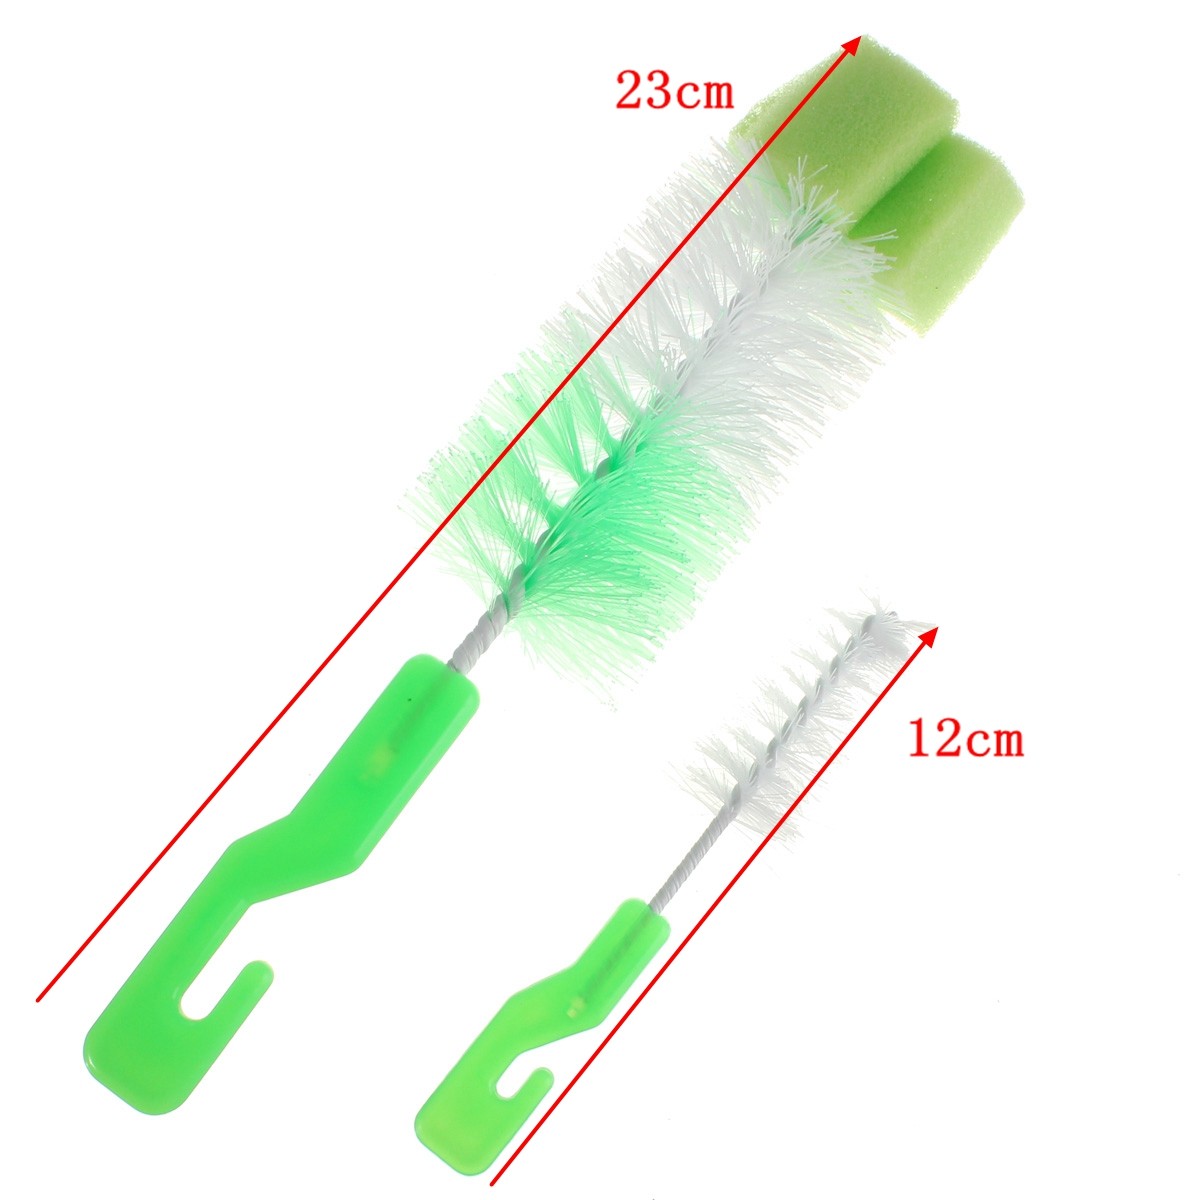 Cleaning-Brush-Cleaner-Baby-Bottle-Spout-Cup-Glass-Teapot-Washing-Cleaning-Heat-resistant-Tool-1394522